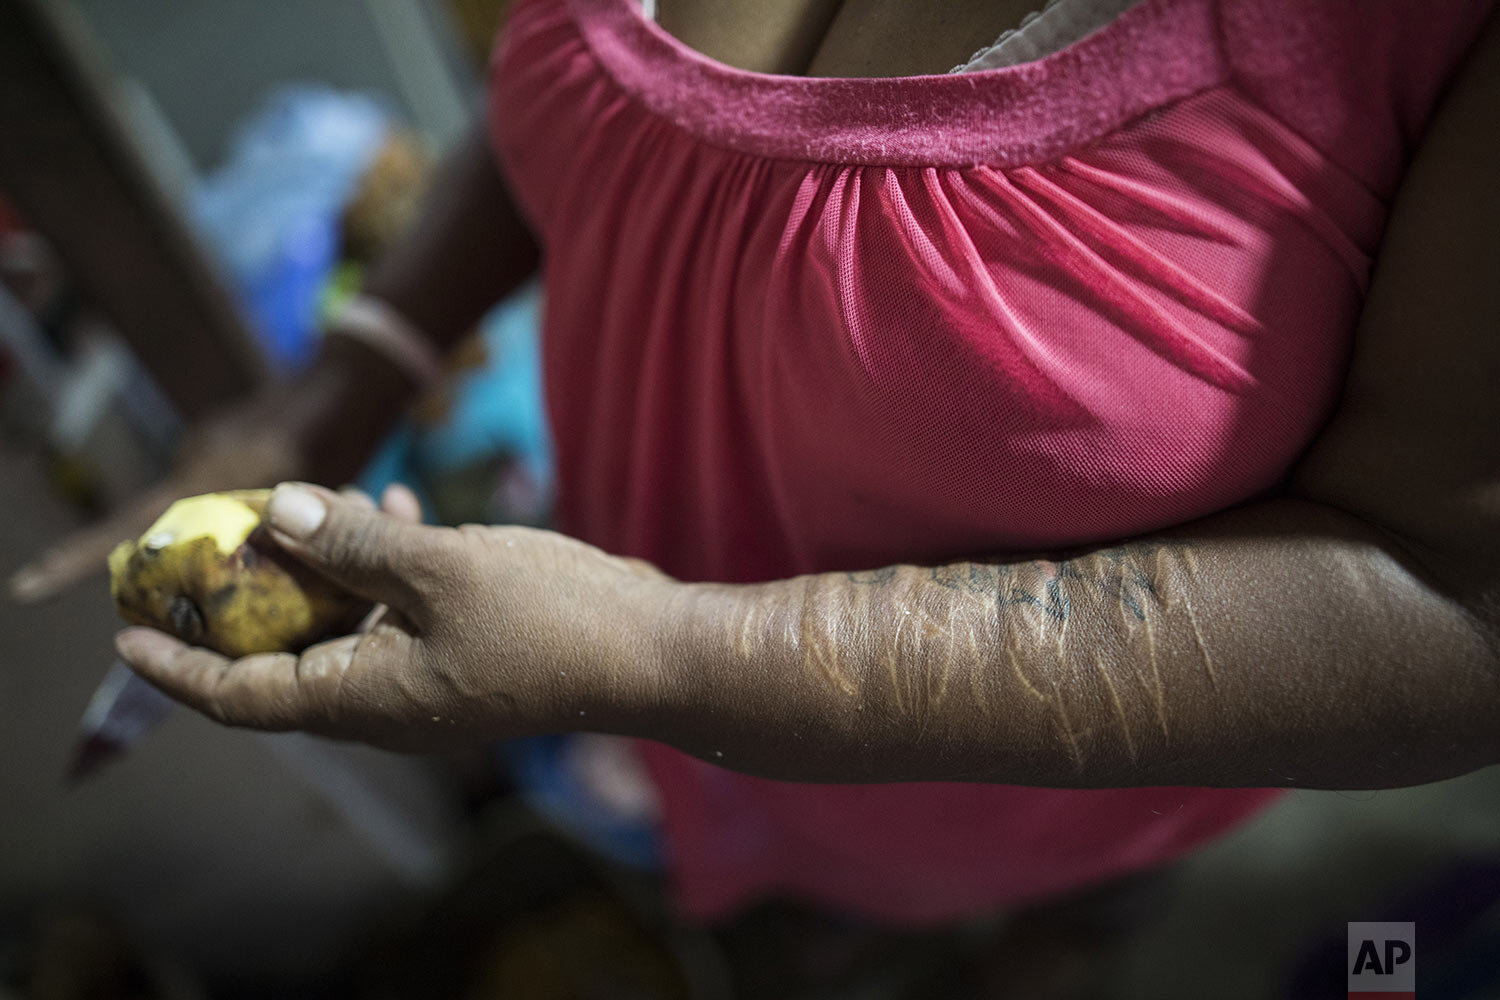  In this April 5, 2020 photo, Carmen Rosa de la Cruz, whose arm is scarred from self-harm, peels potatoes as she prepares a soup inside the deteriorating building nicknamed “Luriganchito,” after the country’s most populous prison, in Lima, Peru. (AP 